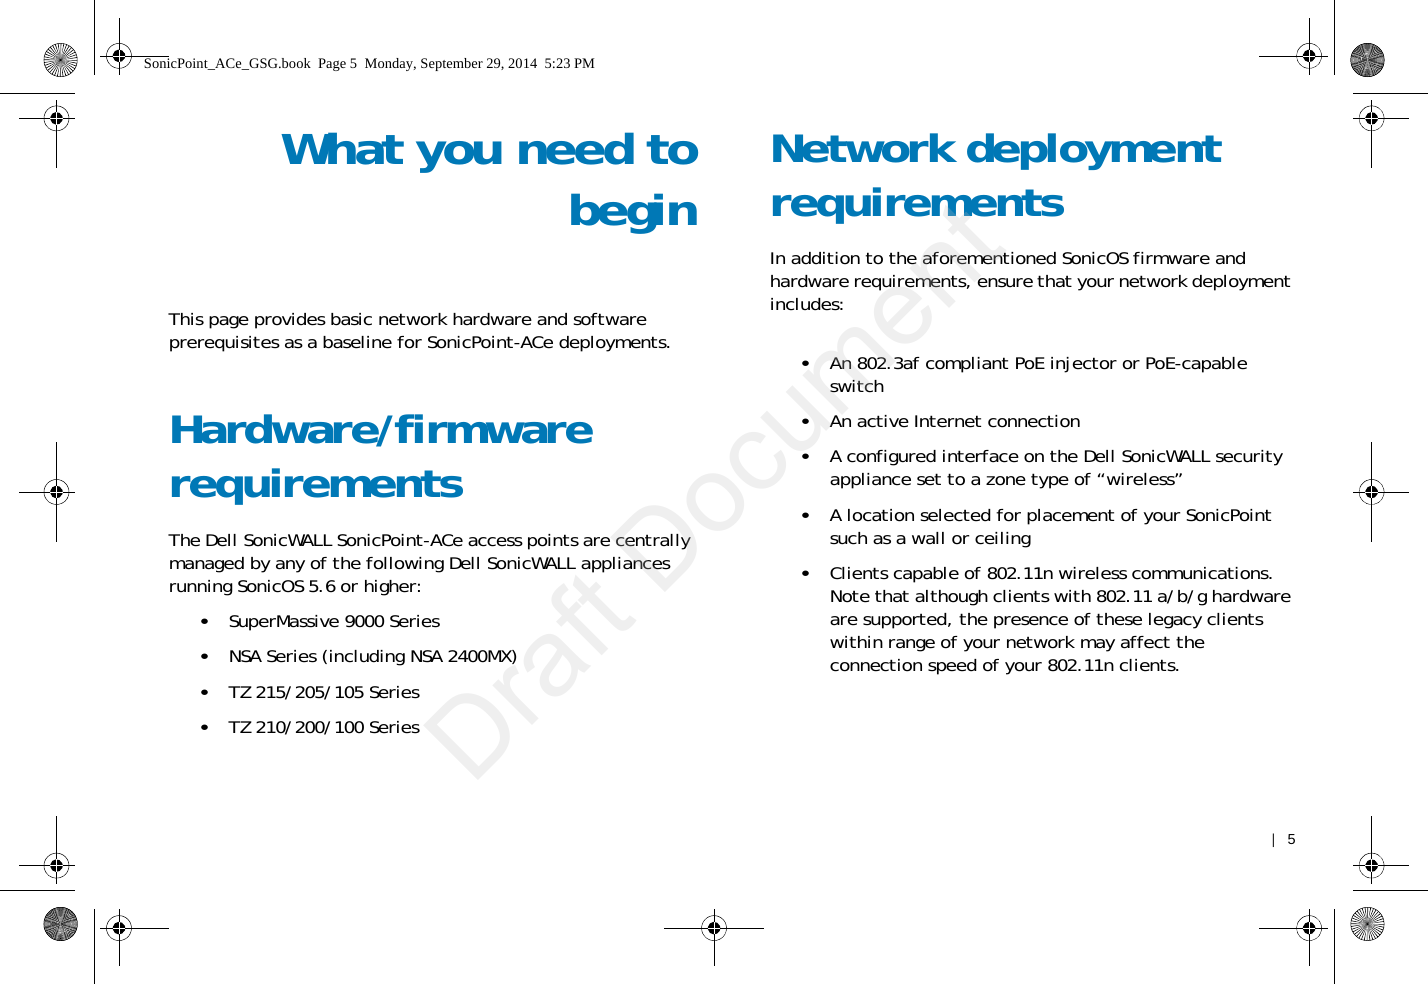    |   5What you need tobeginThis page provides basic network hardware and software prerequisites as a baseline for SonicPoint-ACe deployments. Hardware/firmware requirementsThe Dell SonicWALL SonicPoint-ACe access points are centrally managed by any of the following Dell SonicWALL appliances running SonicOS 5.6 or higher:•SuperMassive 9000 Series•NSA Series (including NSA 2400MX)•TZ 215/205/105 Series•TZ 210/200/100 SeriesNetwork deployment requirementsIn addition to the aforementioned SonicOS firmware and hardware requirements, ensure that your network deployment includes:•An 802.3af compliant PoE injector or PoE-capable switch•An active Internet connection•A configured interface on the Dell SonicWALL security appliance set to a zone type of “wireless”•A location selected for placement of your SonicPoint such as a wall or ceiling•Clients capable of 802.11n wireless communications. Note that although clients with 802.11 a/b/g hardware are supported, the presence of these legacy clients within range of your network may affect the connection speed of your 802.11n clients. SonicPoint_ACe_GSG.book  Page 5  Monday, September 29, 2014  5:23 PMDraft Document